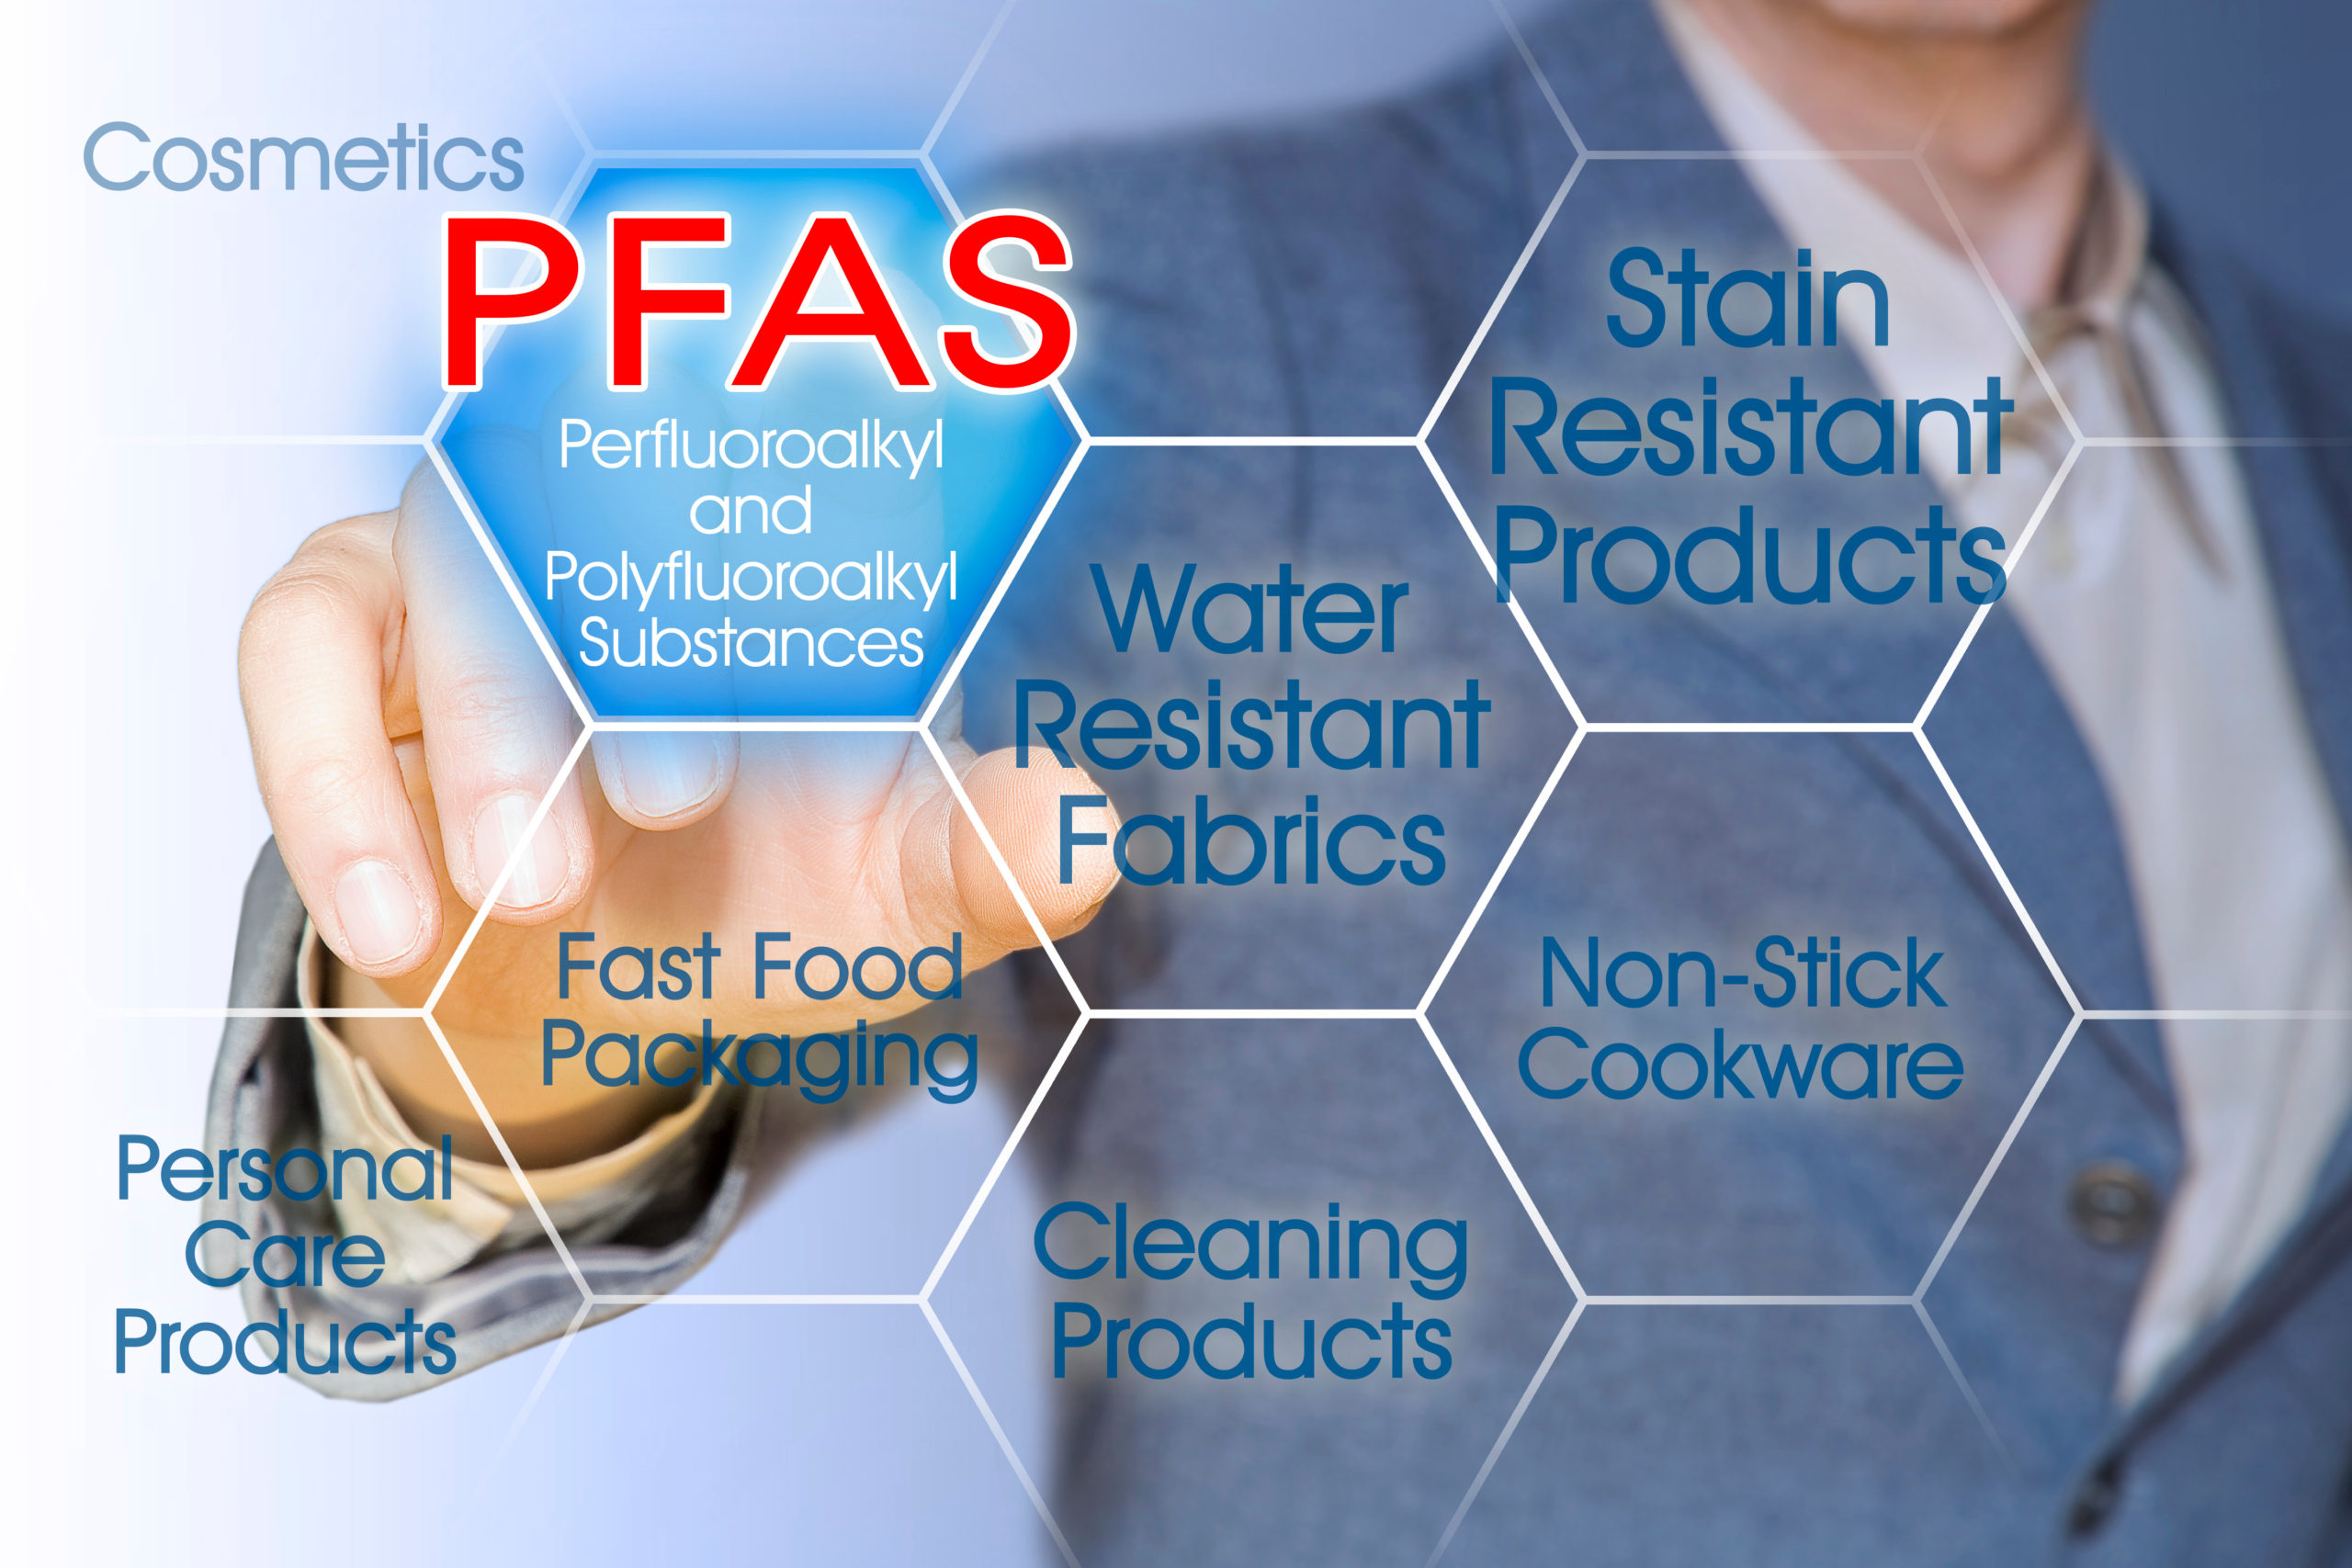 Chemical Companies Agree to Nearly $11.5B in PFAS Payments